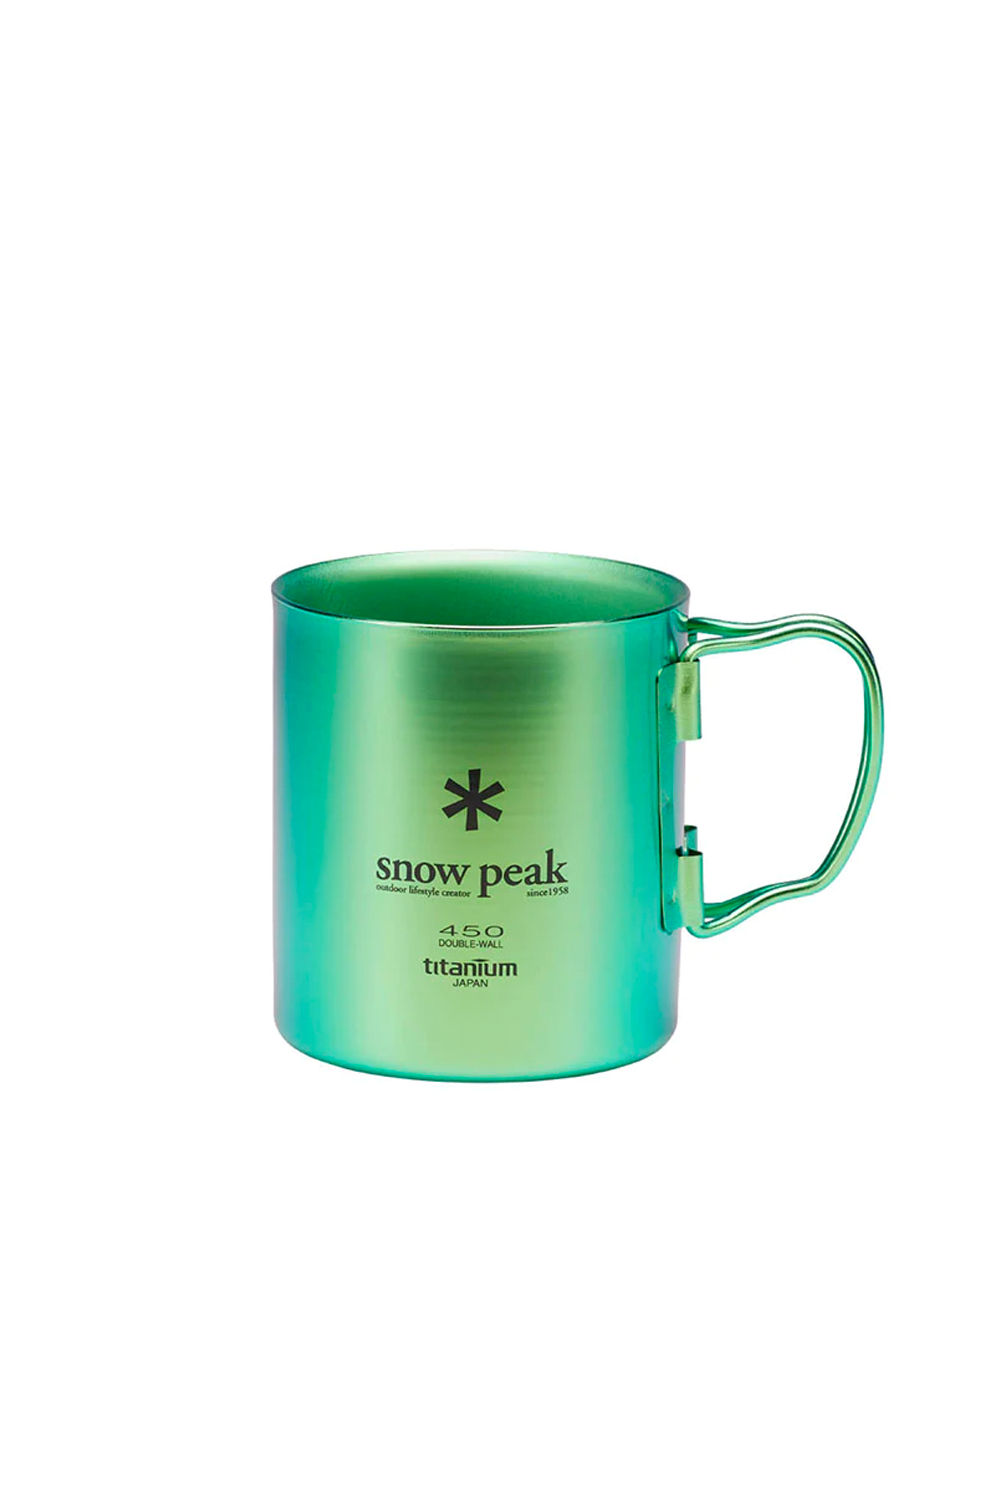 The SNOW PEAK - TITANIUM DOUBLE WALL CUP 450ml ANODISED GREEN available online with global shipping, and in PAM Stores Melbourne and Sydney.